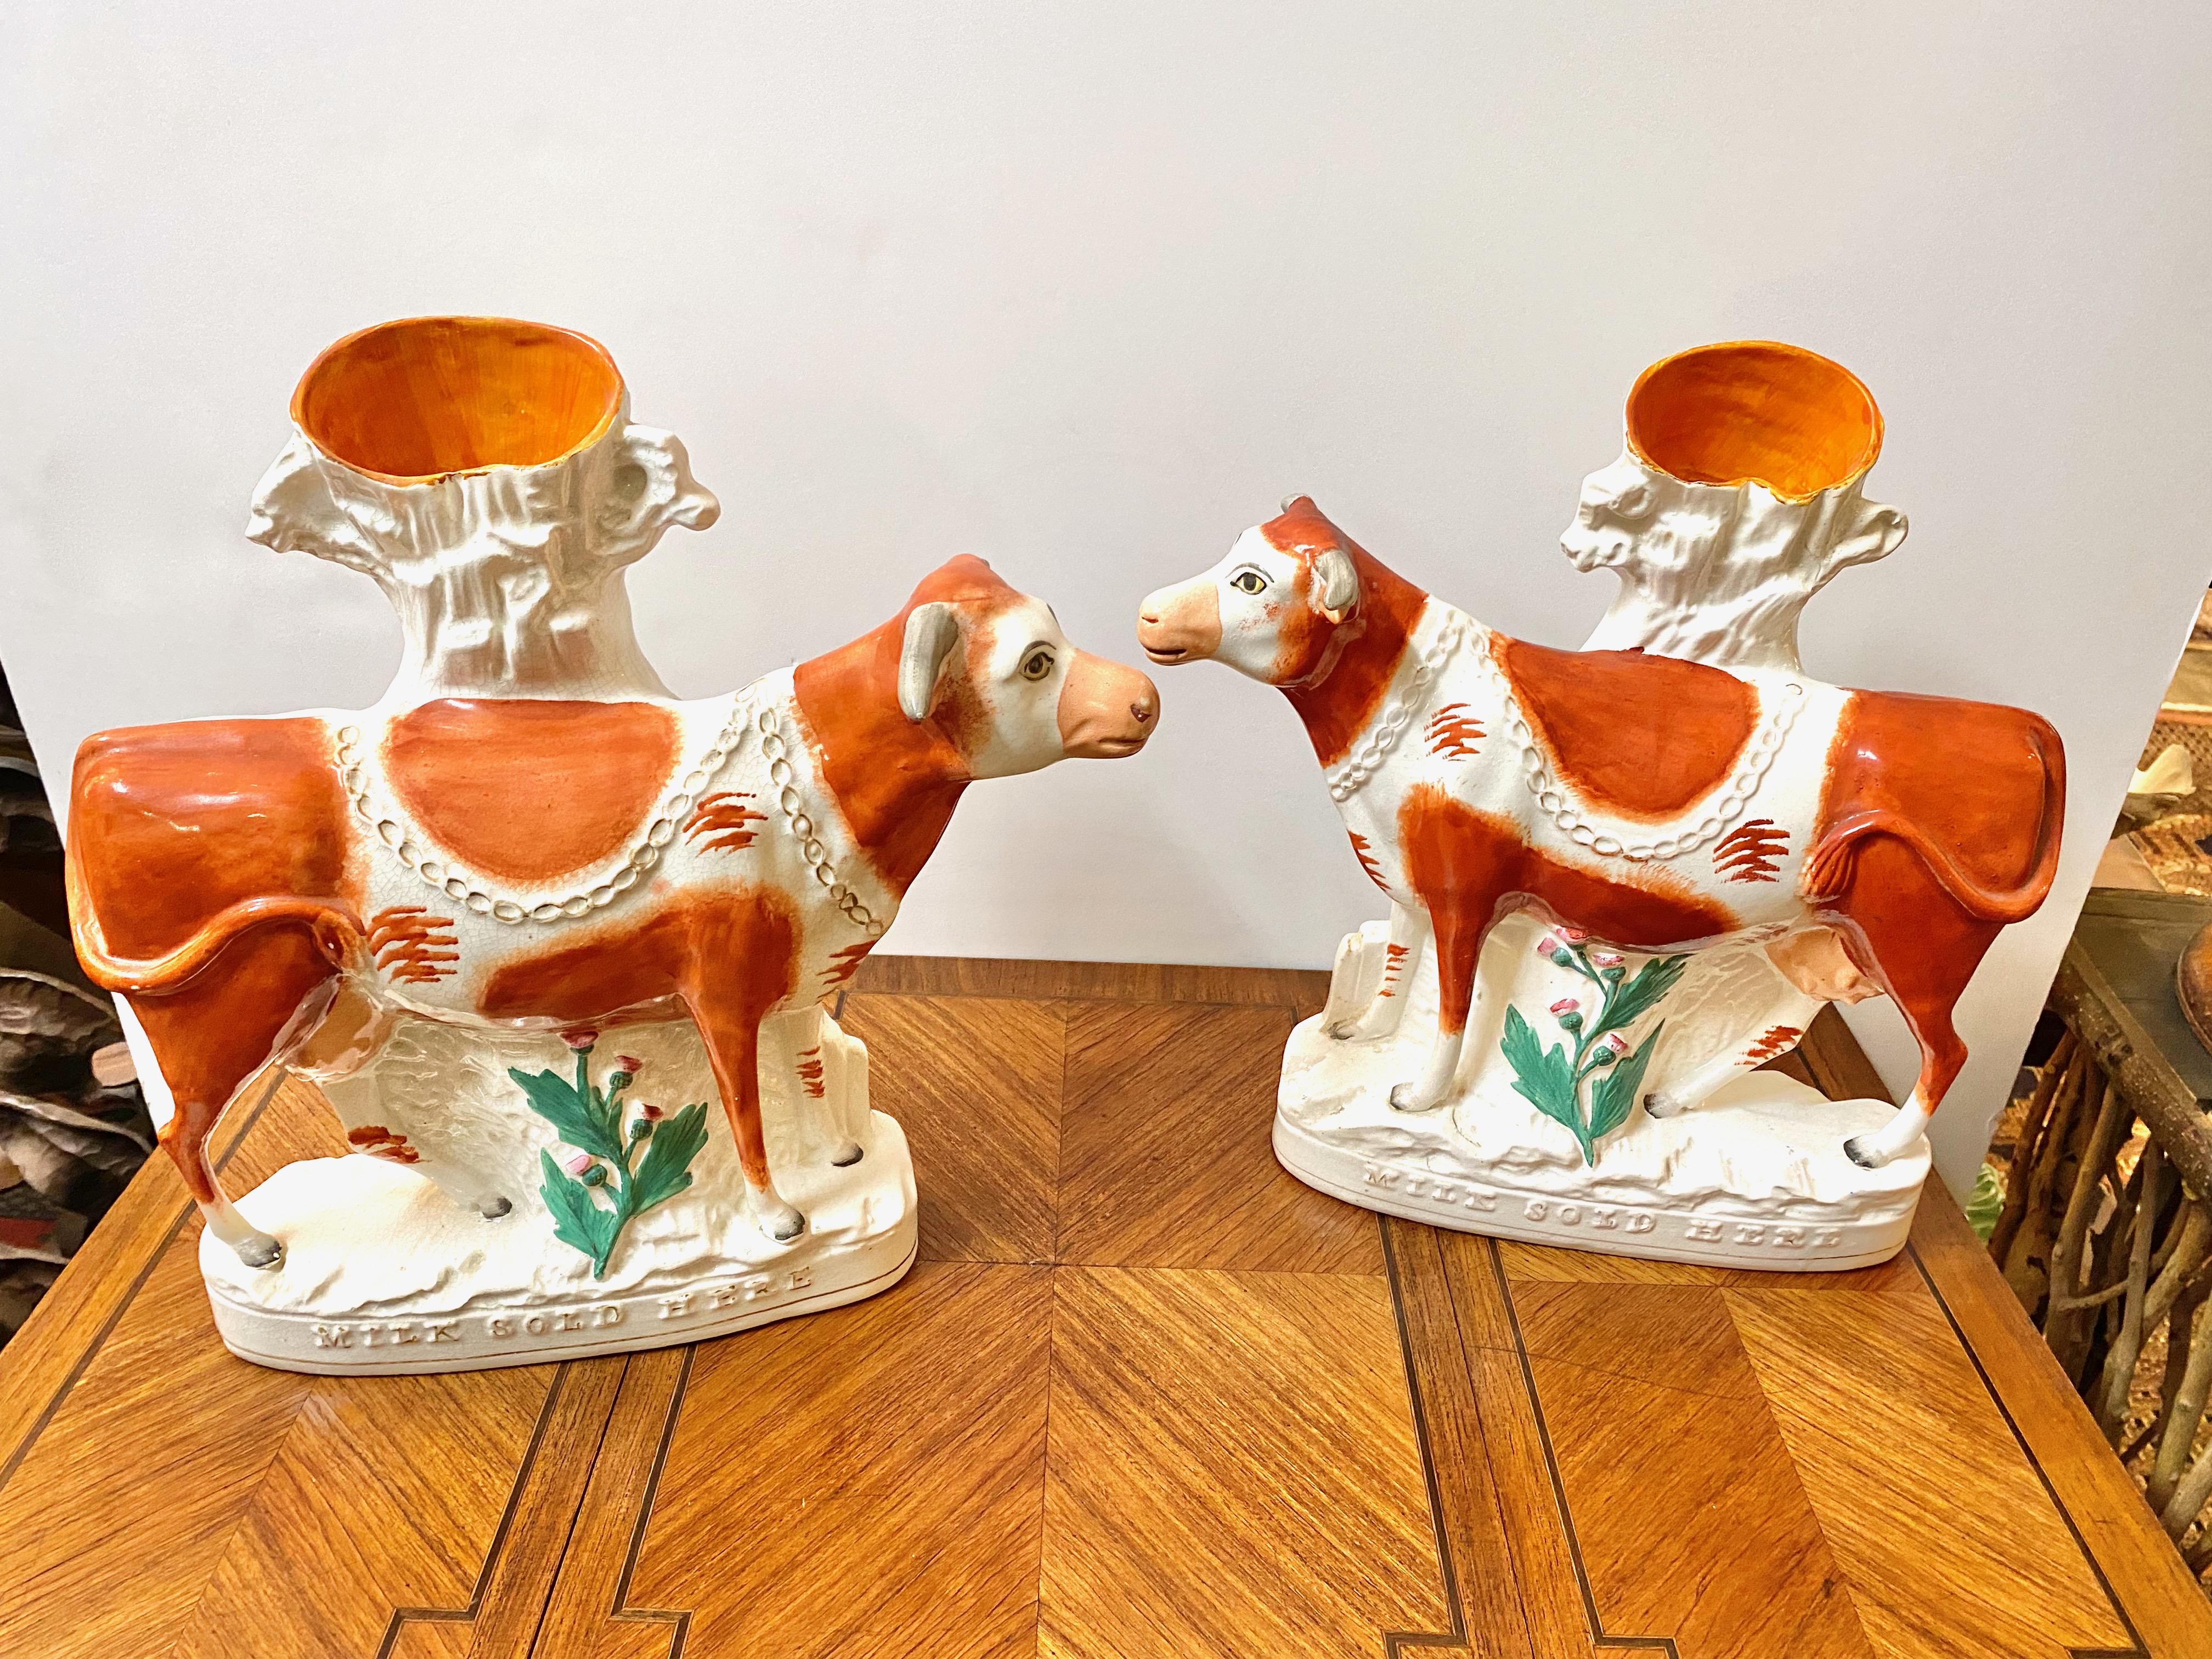 This is a very large and unusual pair of mid-19th century Victorian Staffordshire Dairy Cows that were originally used as trade signs in a milk shop. The inscription at the base of the figures reads 